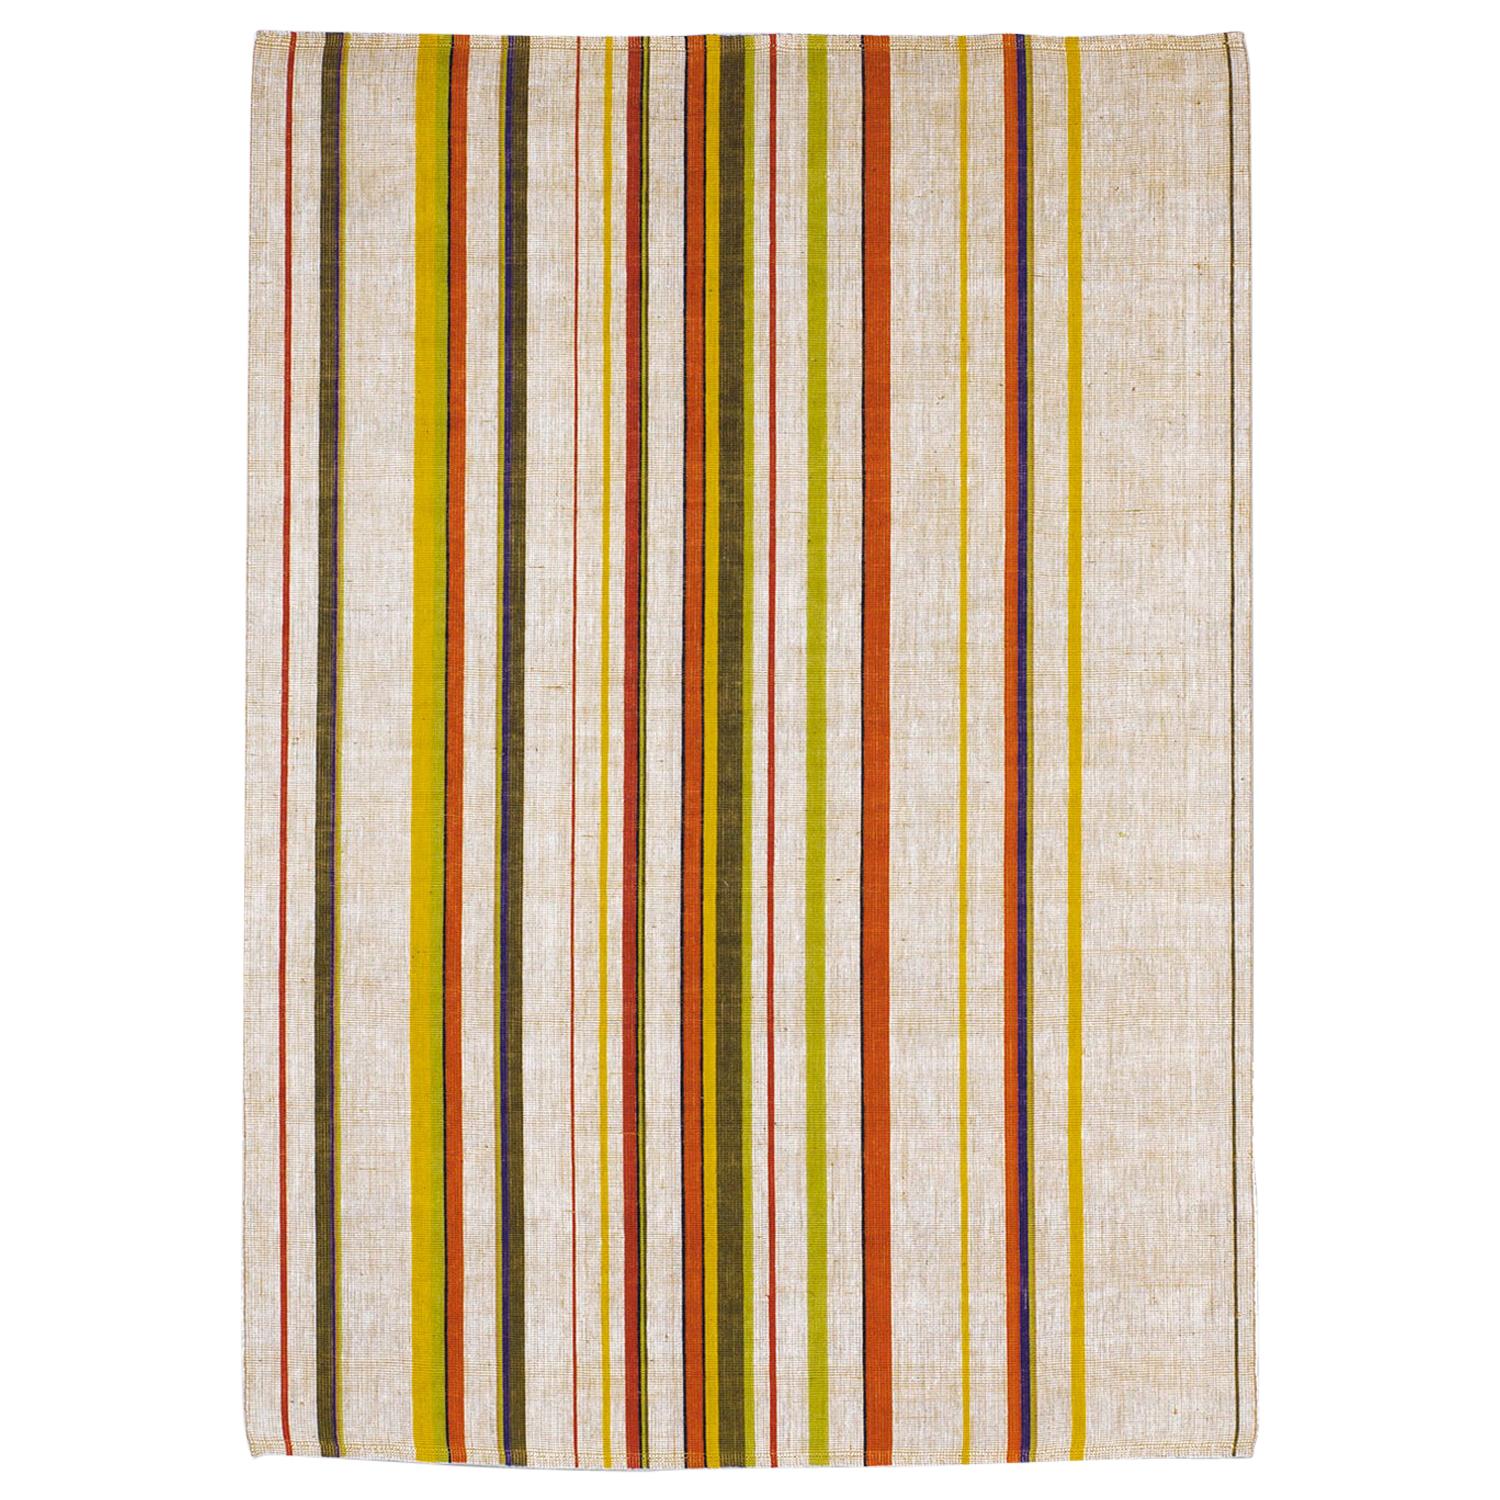 21st Cent Striped Natural Fibers Rug by Deanna Comellini In Stock 200x300 cm